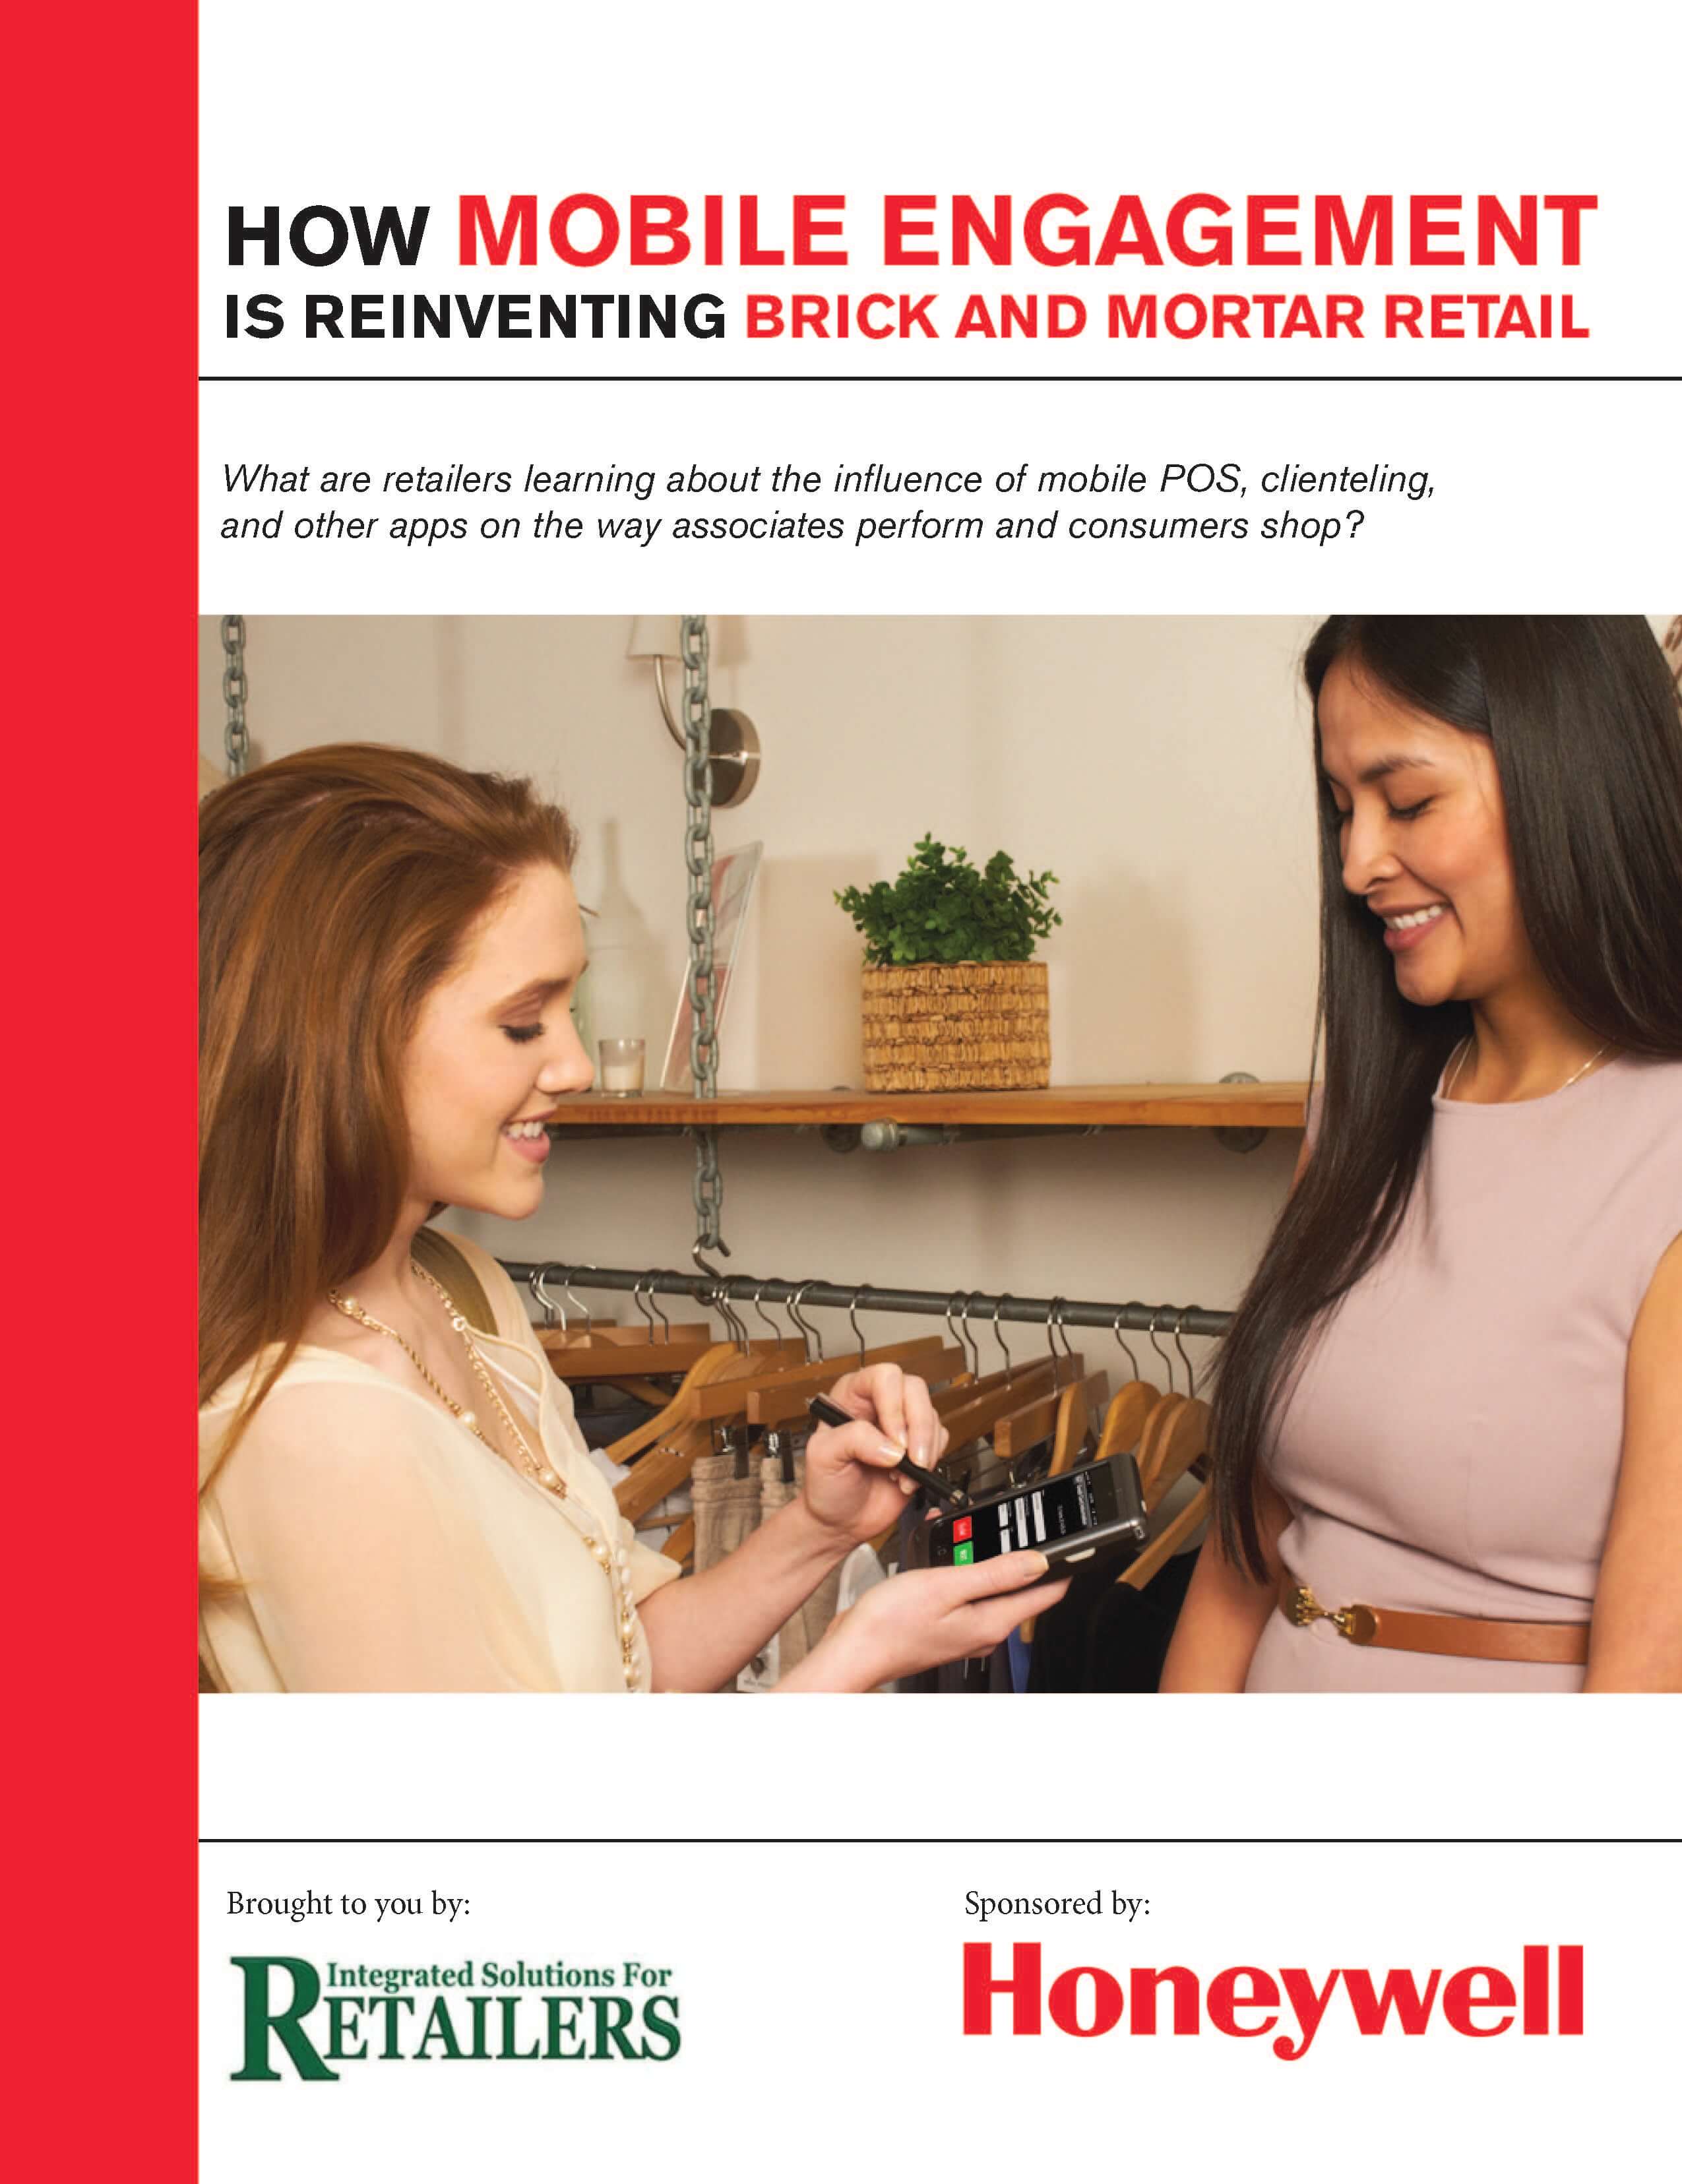 How mobile engagement is reinventing brick and mortar retail